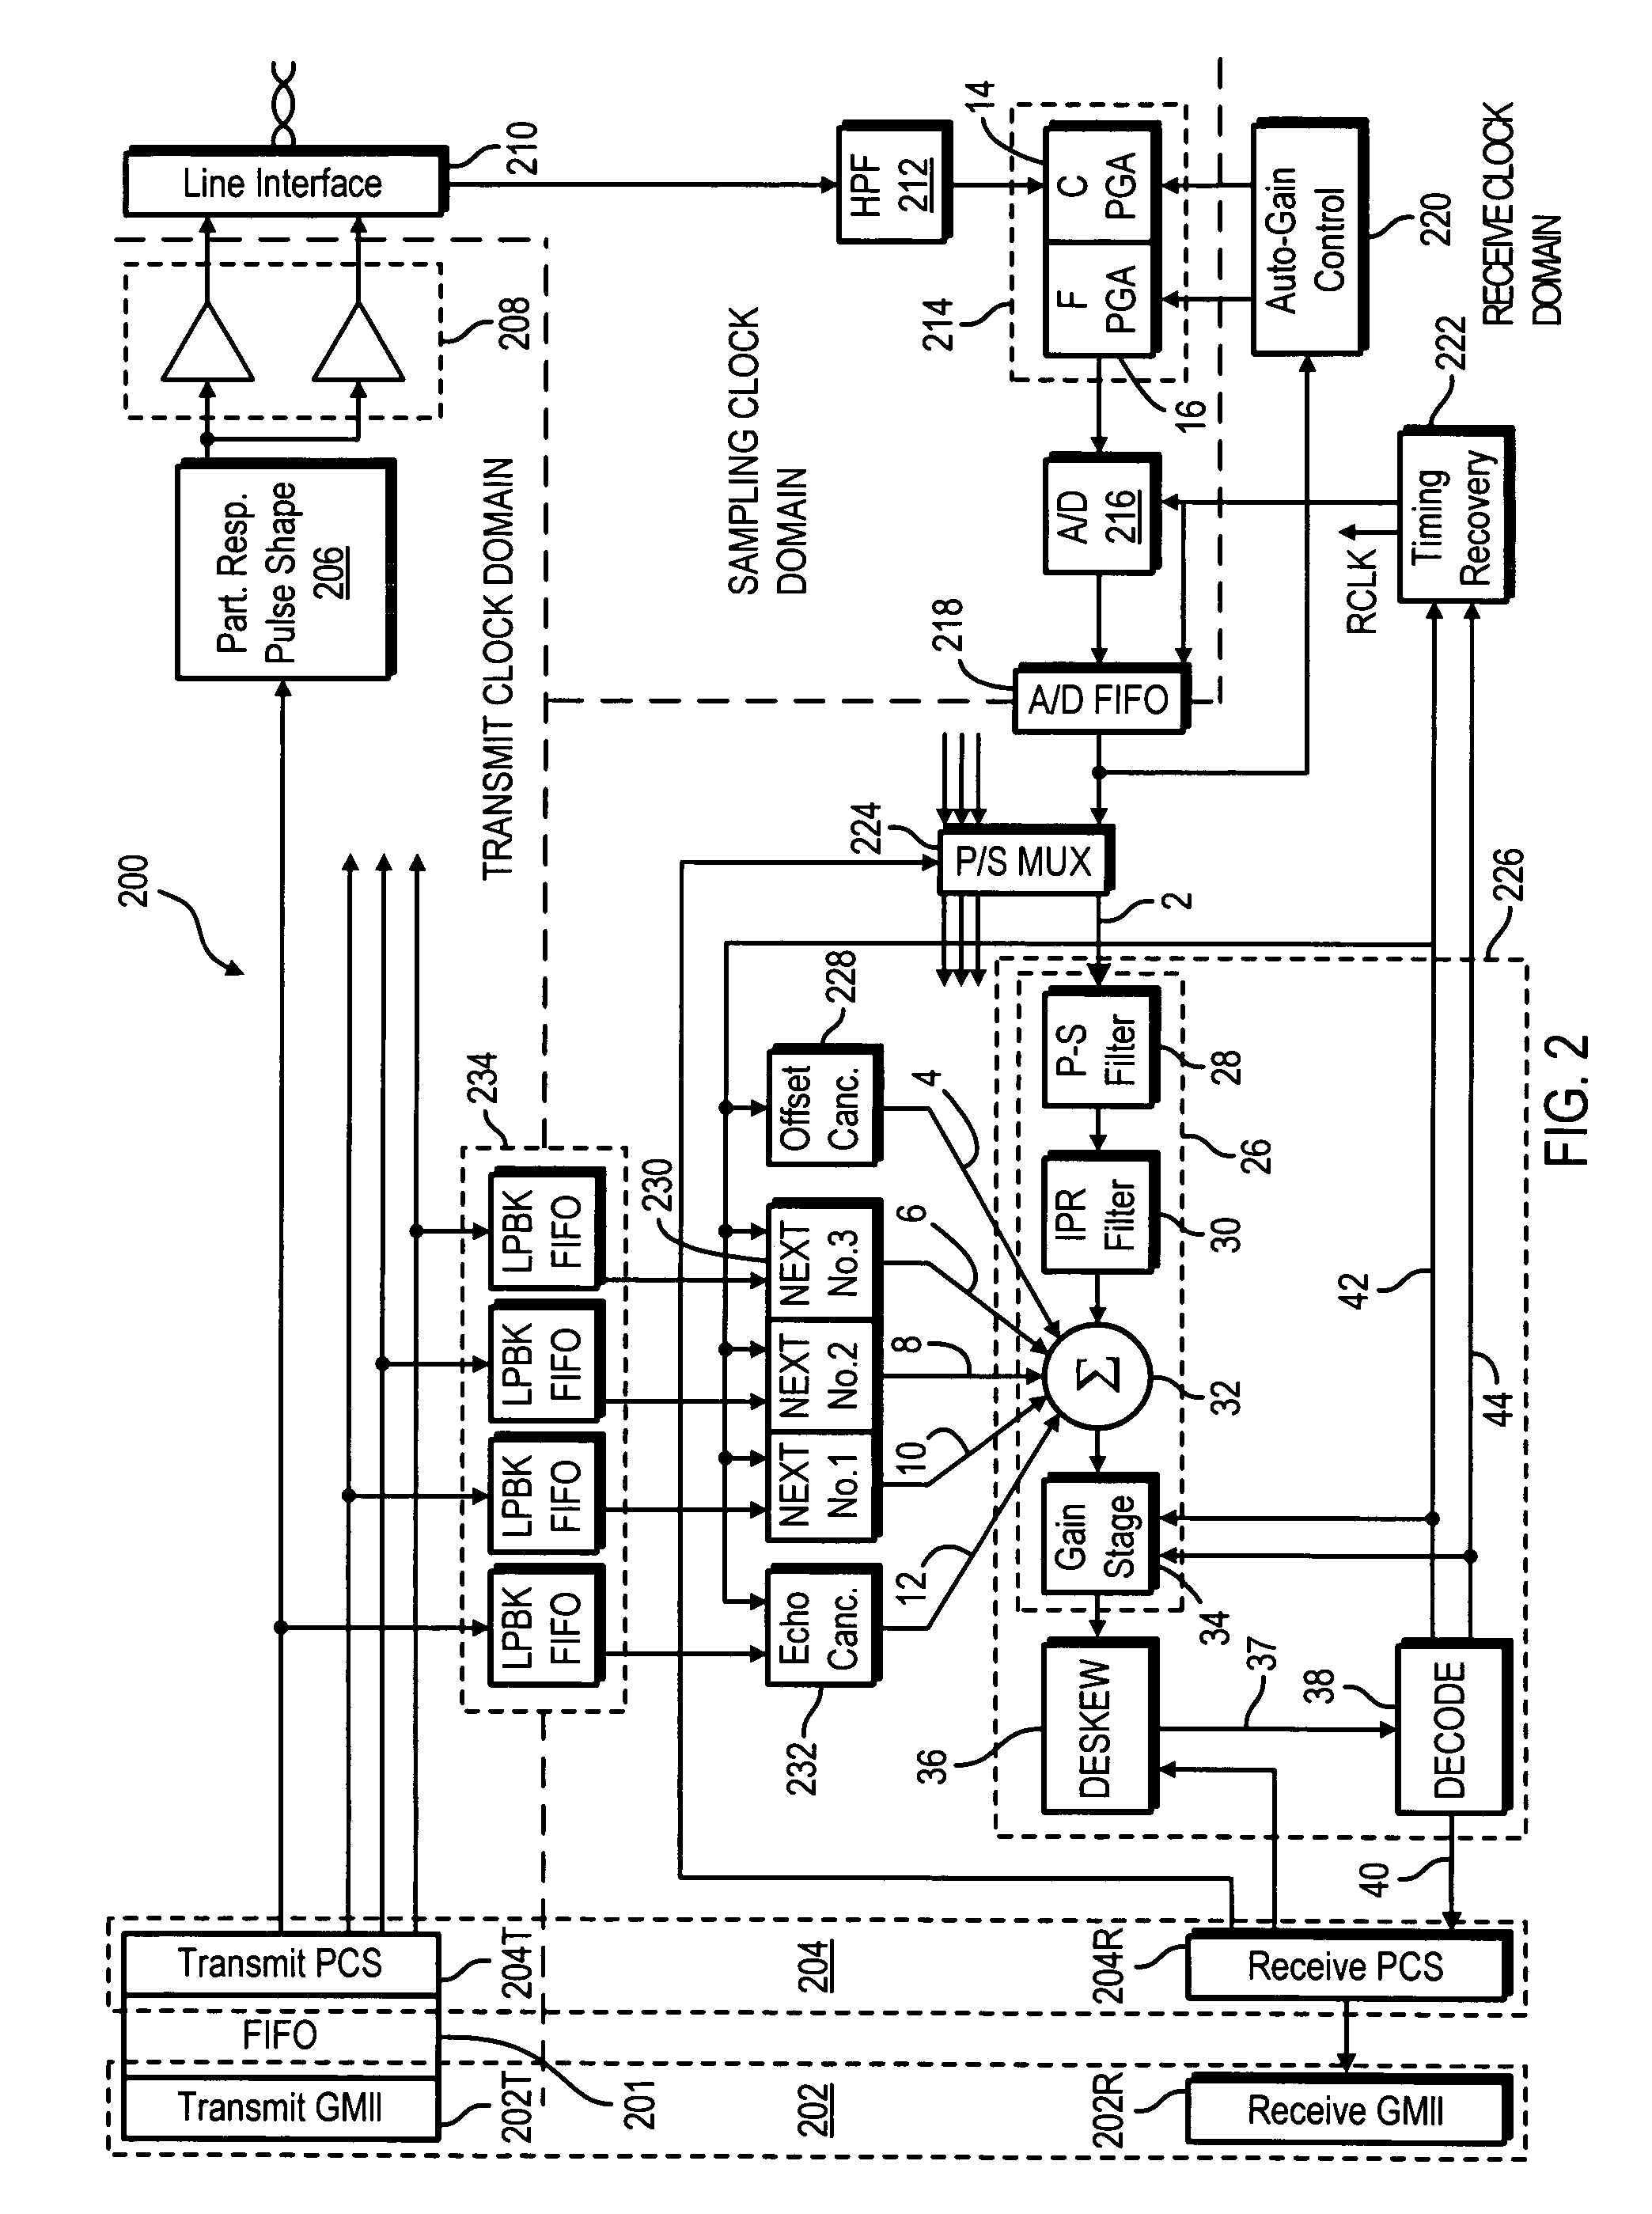 Phy control module for a multi-pair gigabit transceiver